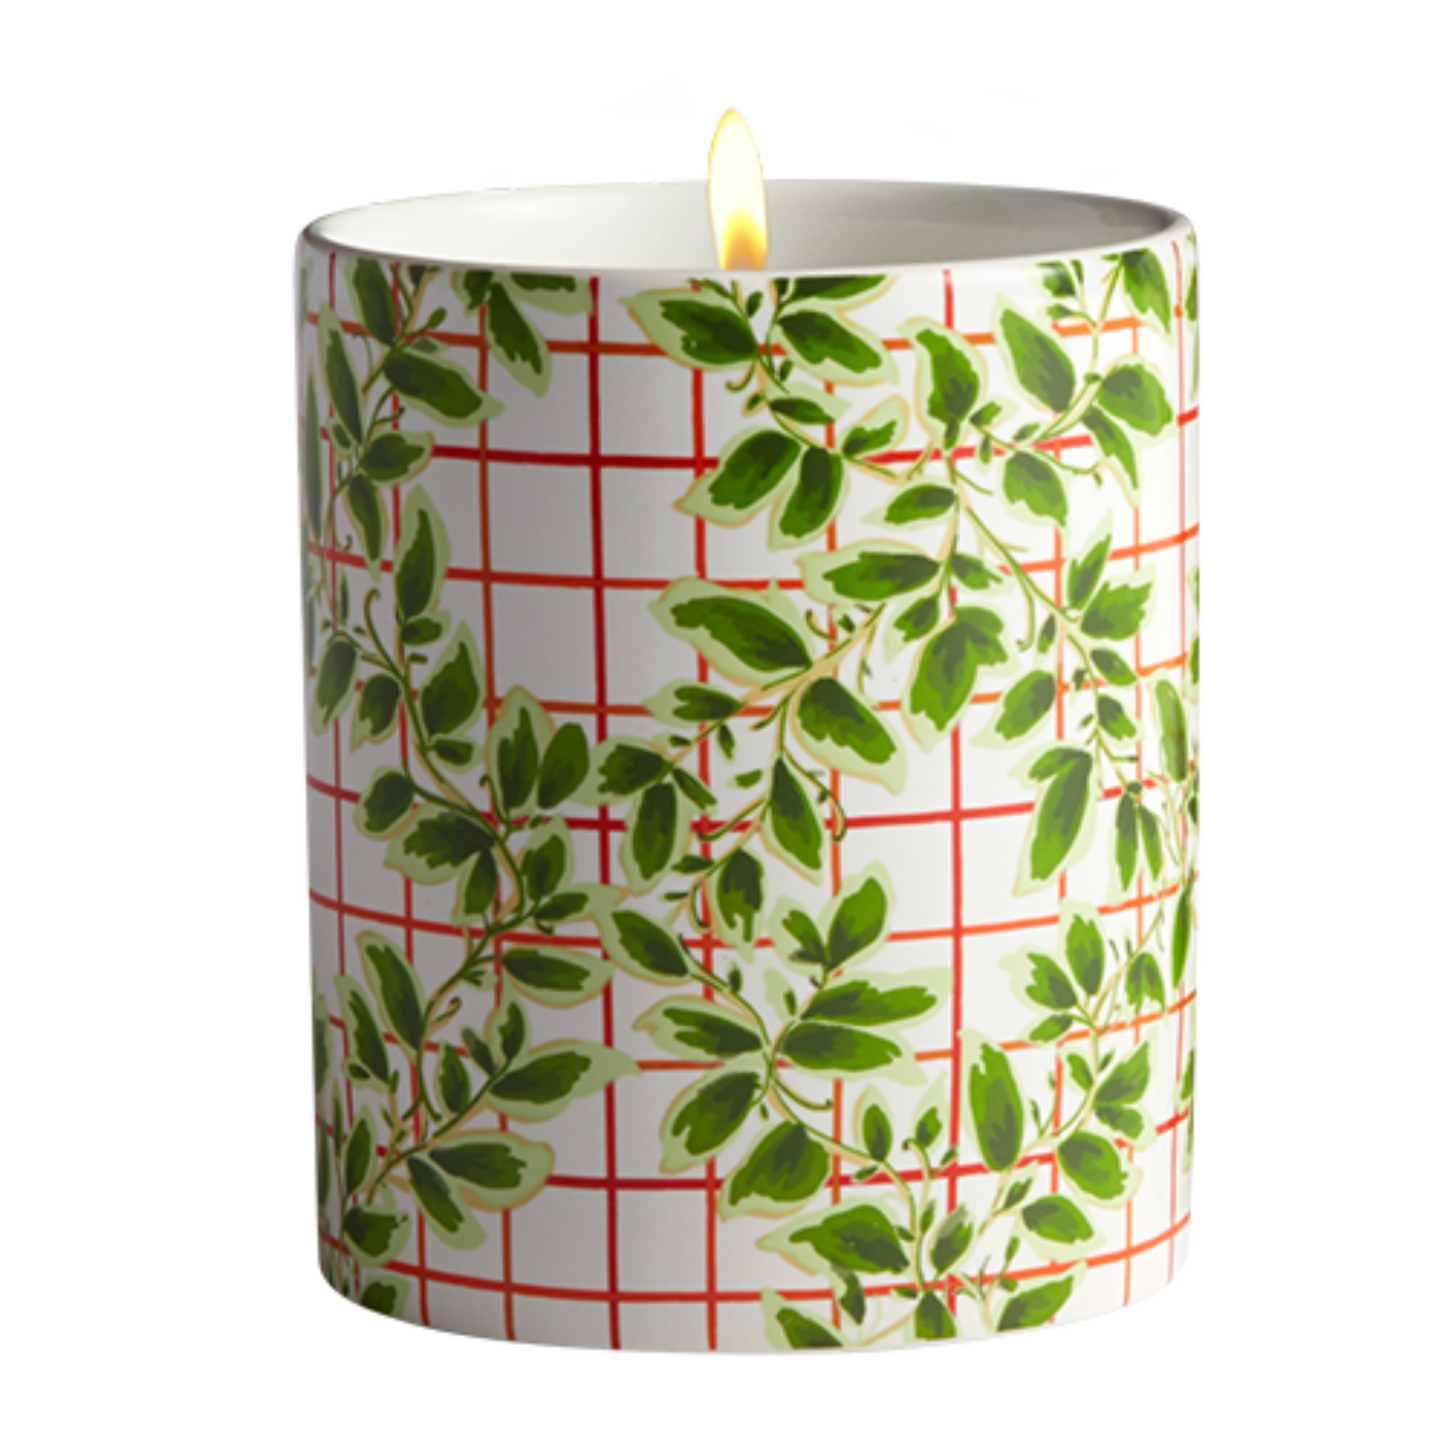 Primary image of The Ivy Candle Medium Lit